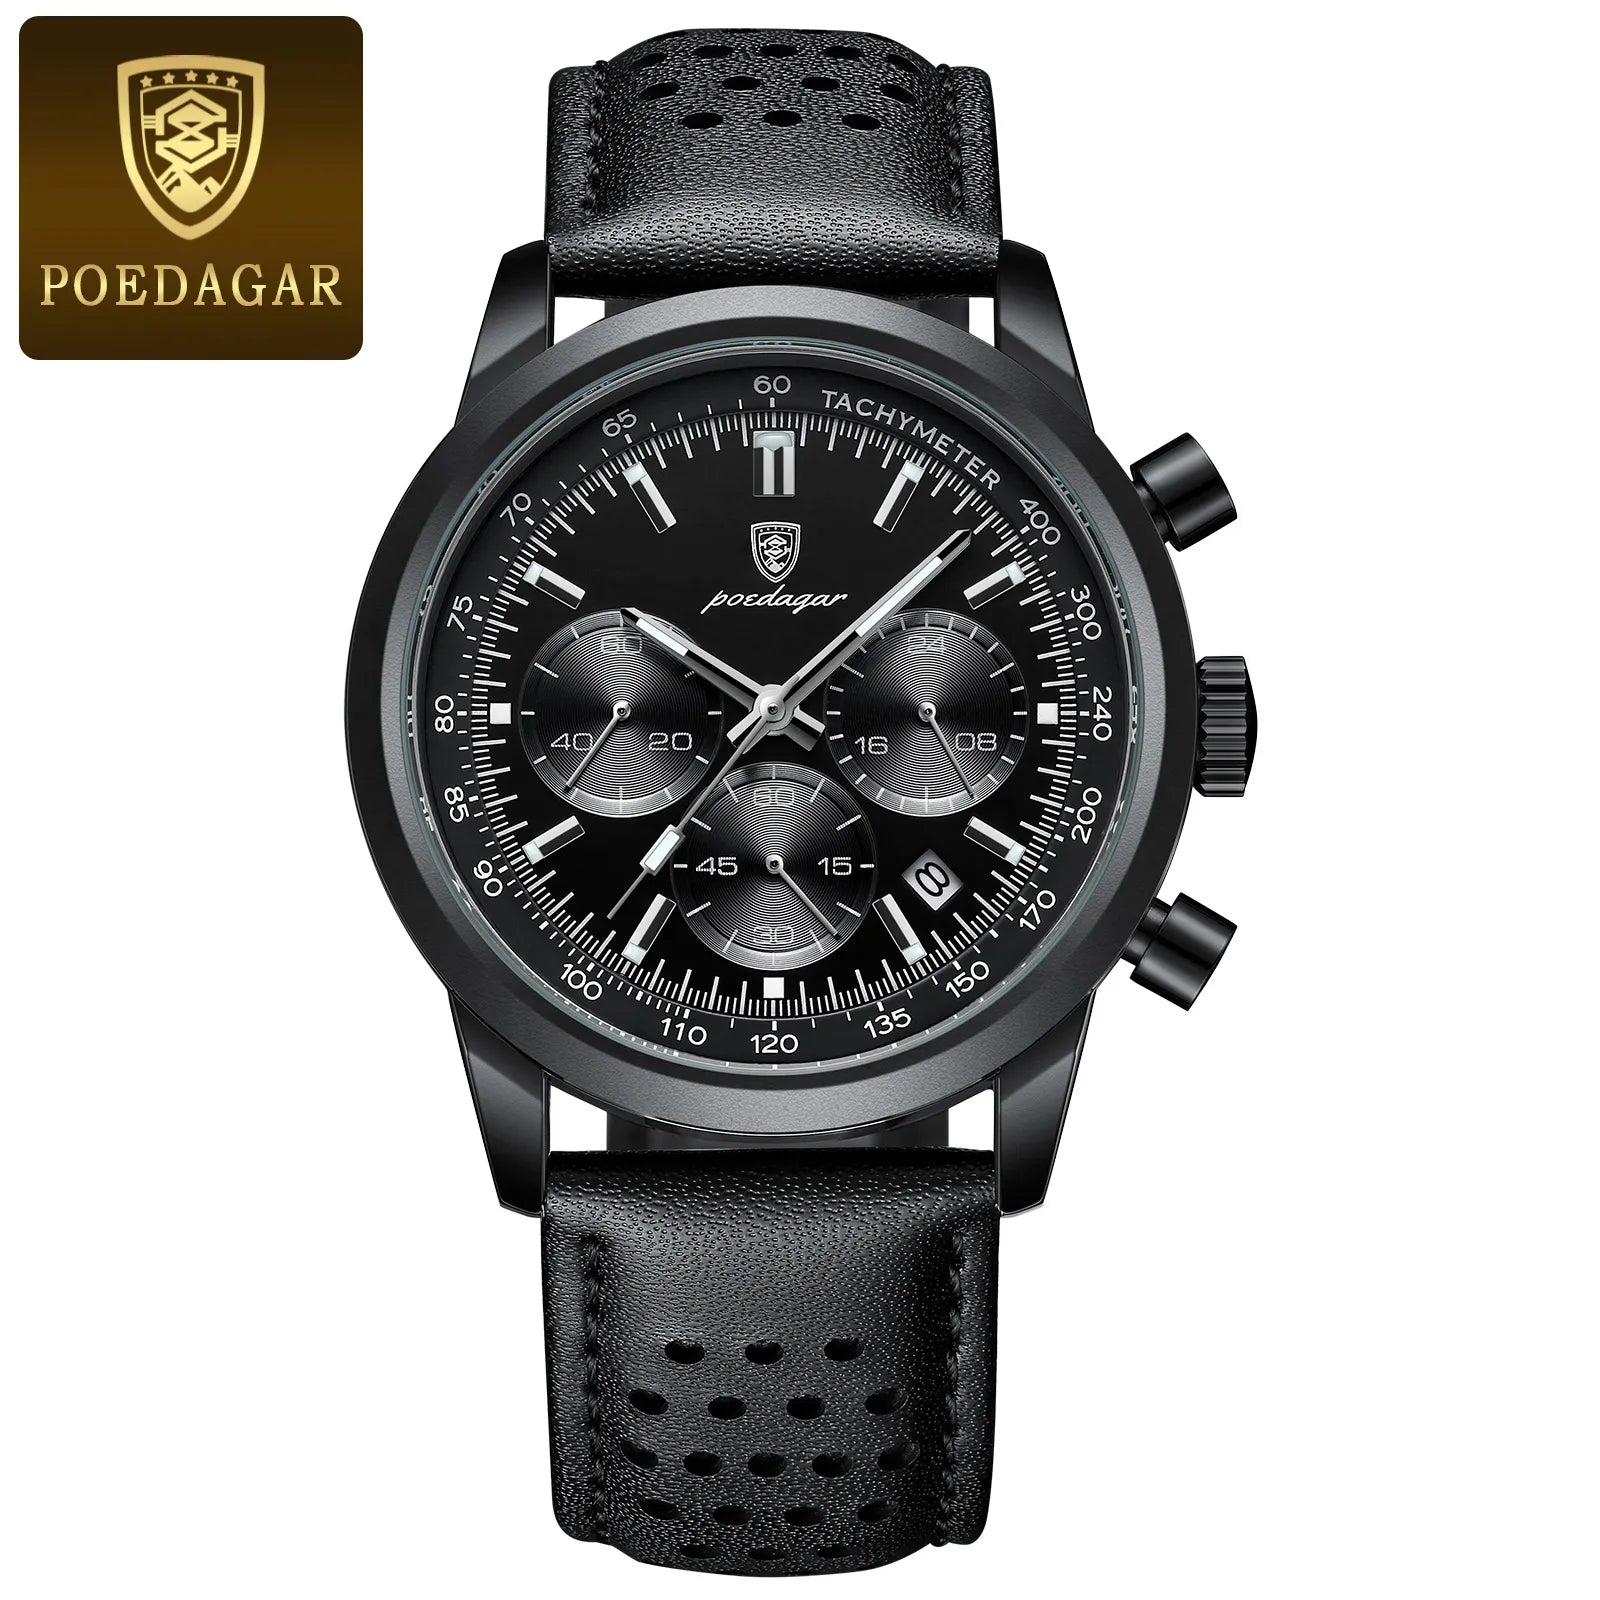 "Black color Quartz watch with luminous display, auto date, chronograph, and complete calendar features. Leather band, stainless steel case, scratch-resistant Hardlex window."